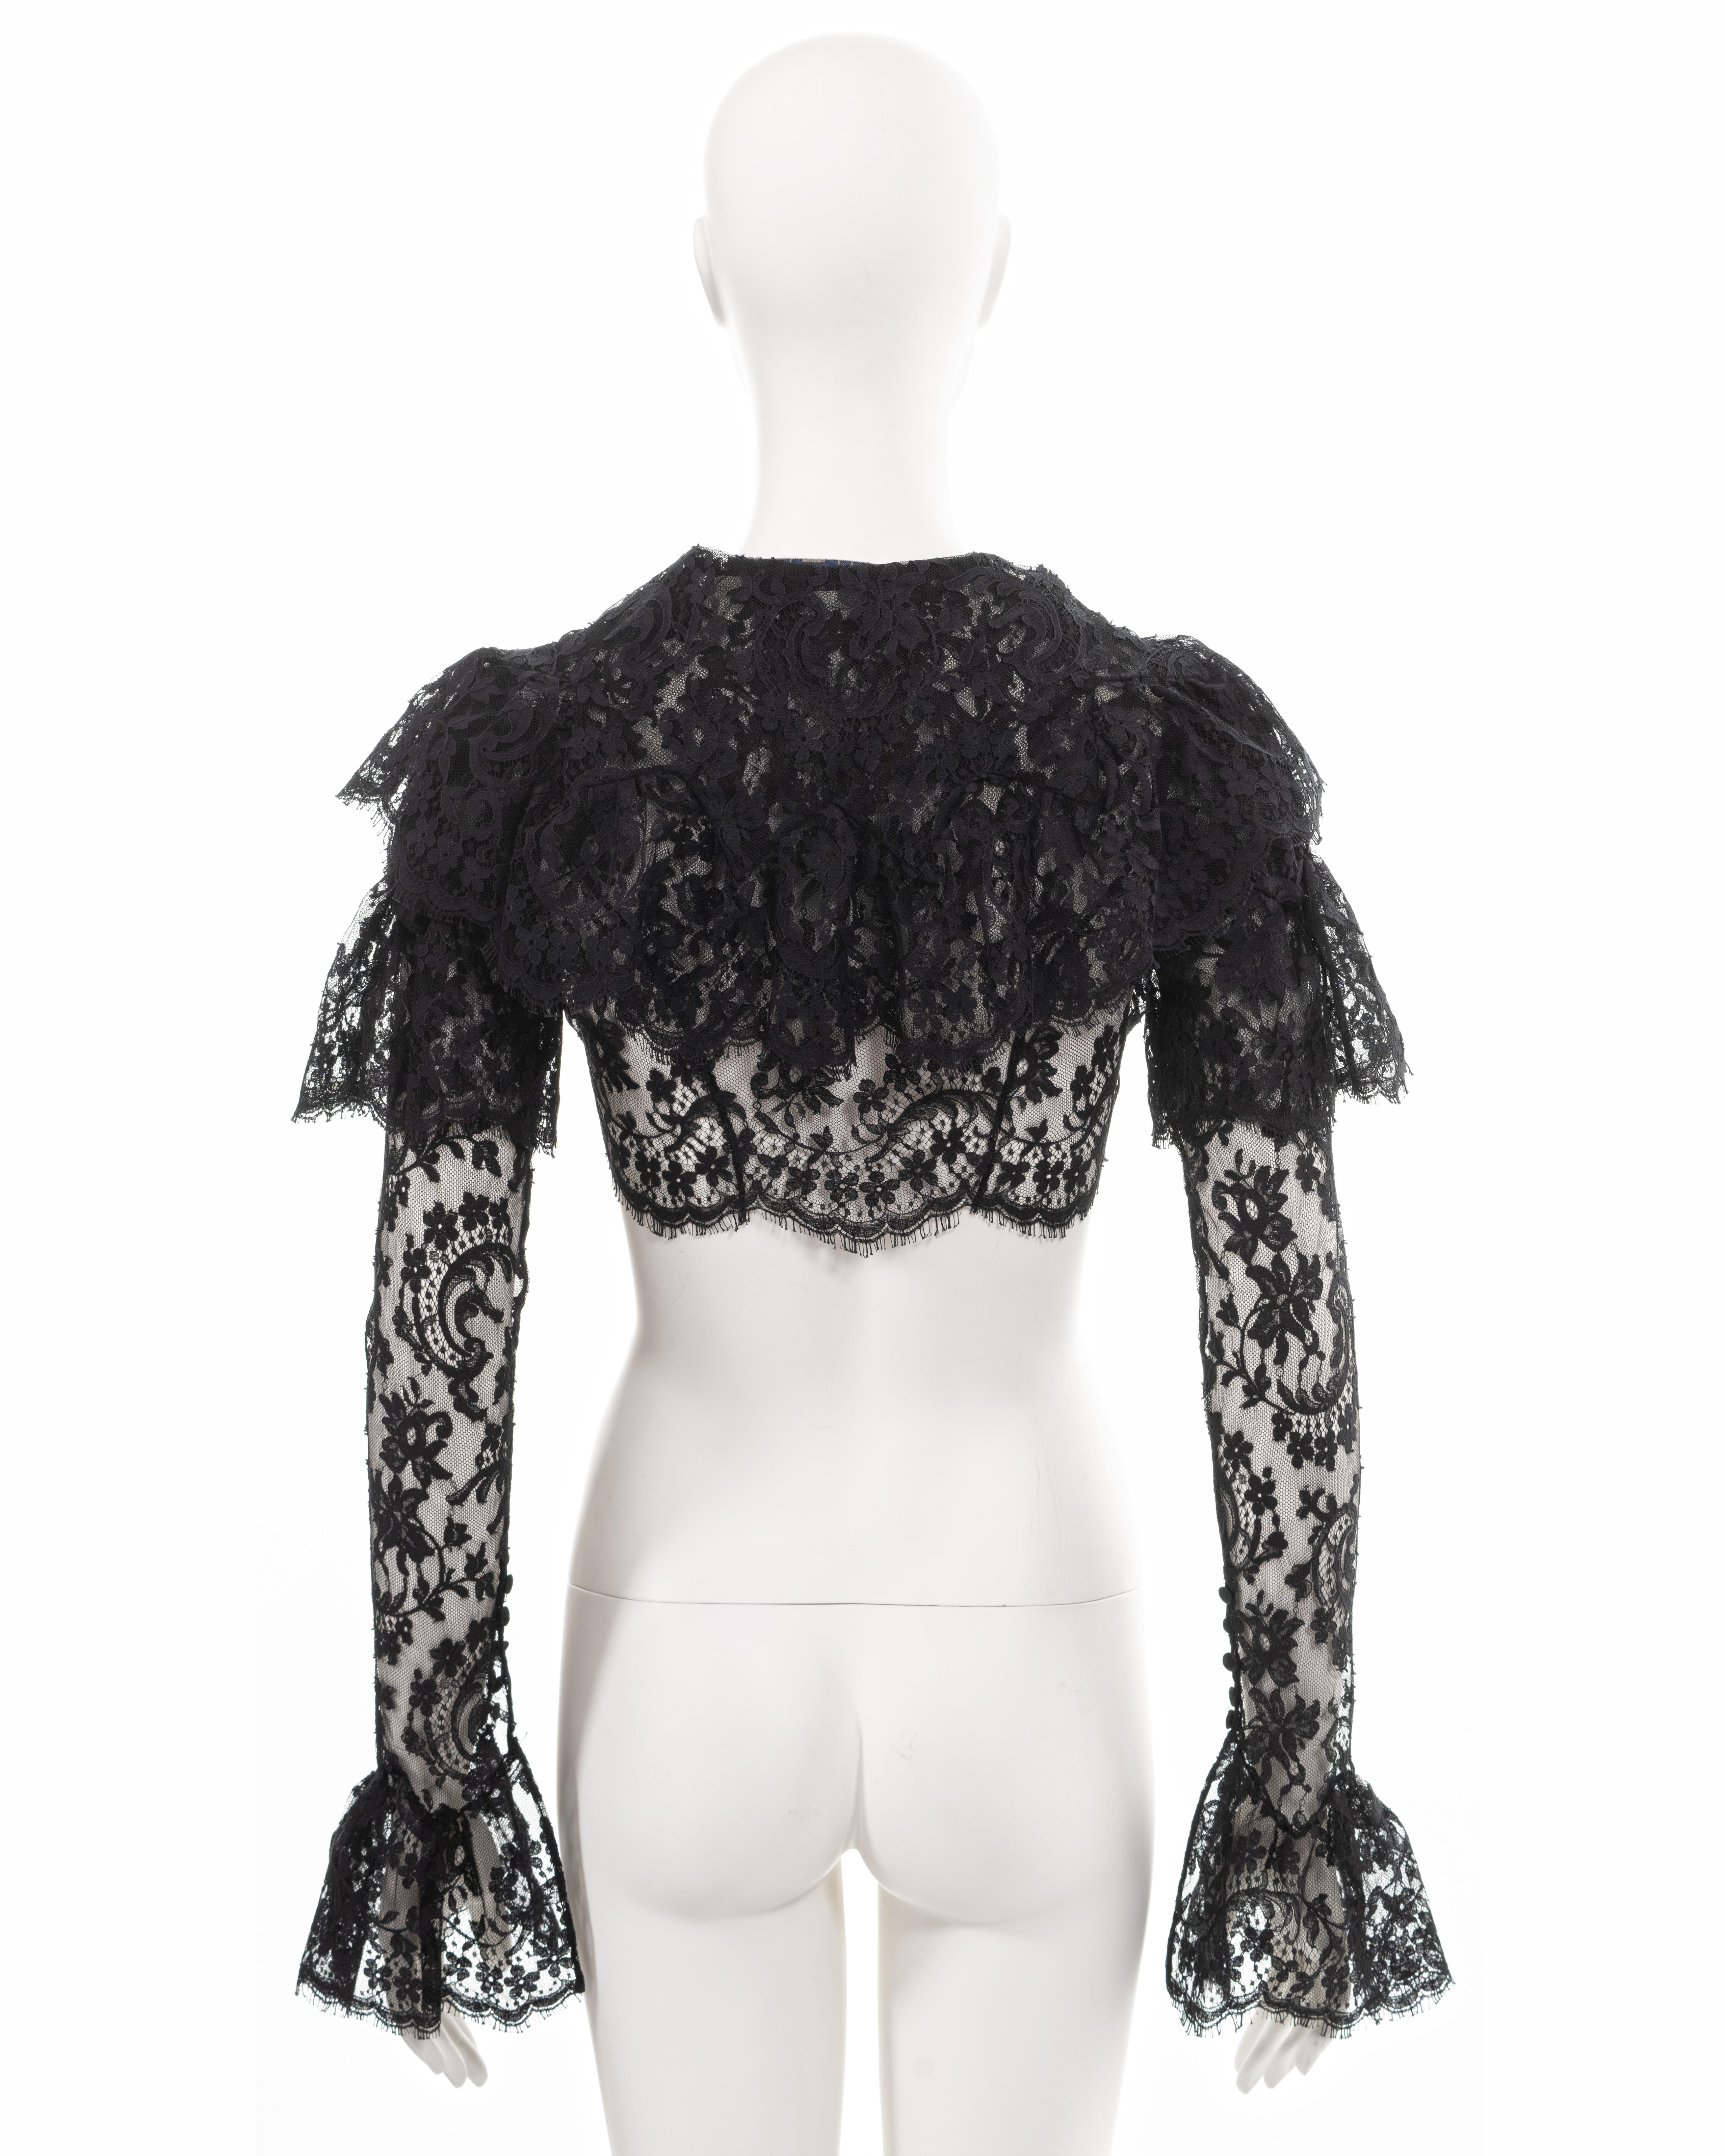 Givenchy by John Galliano black strapless evening dress and lace bolero, ss 1997 For Sale 14